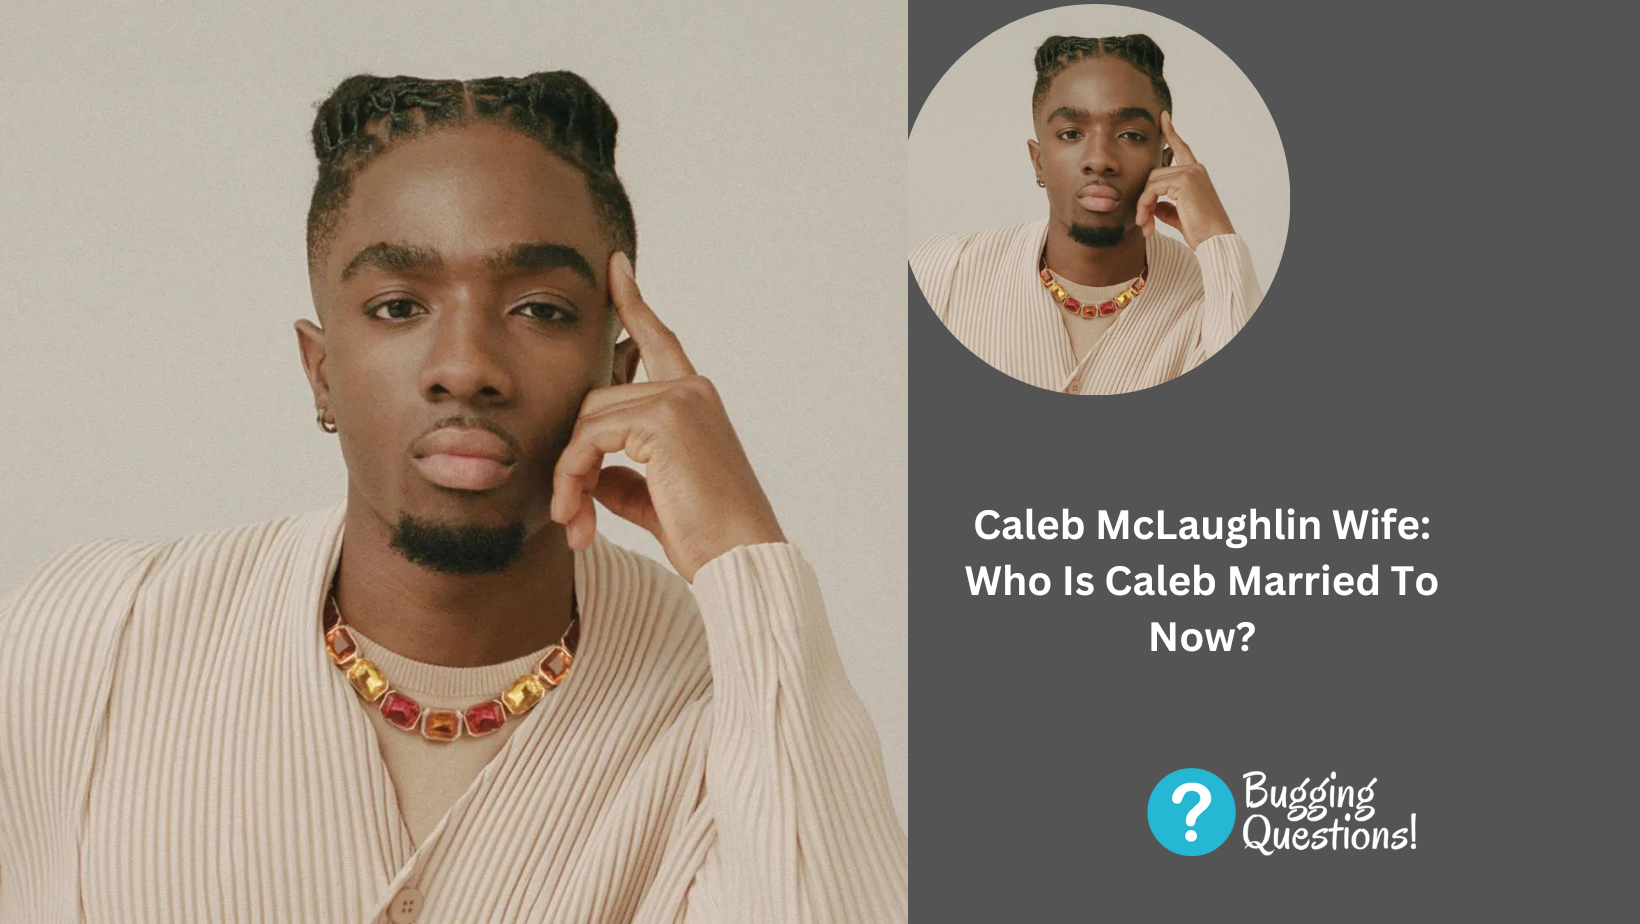 Caleb McLaughlin Wife: Who Is Caleb Married To Now?